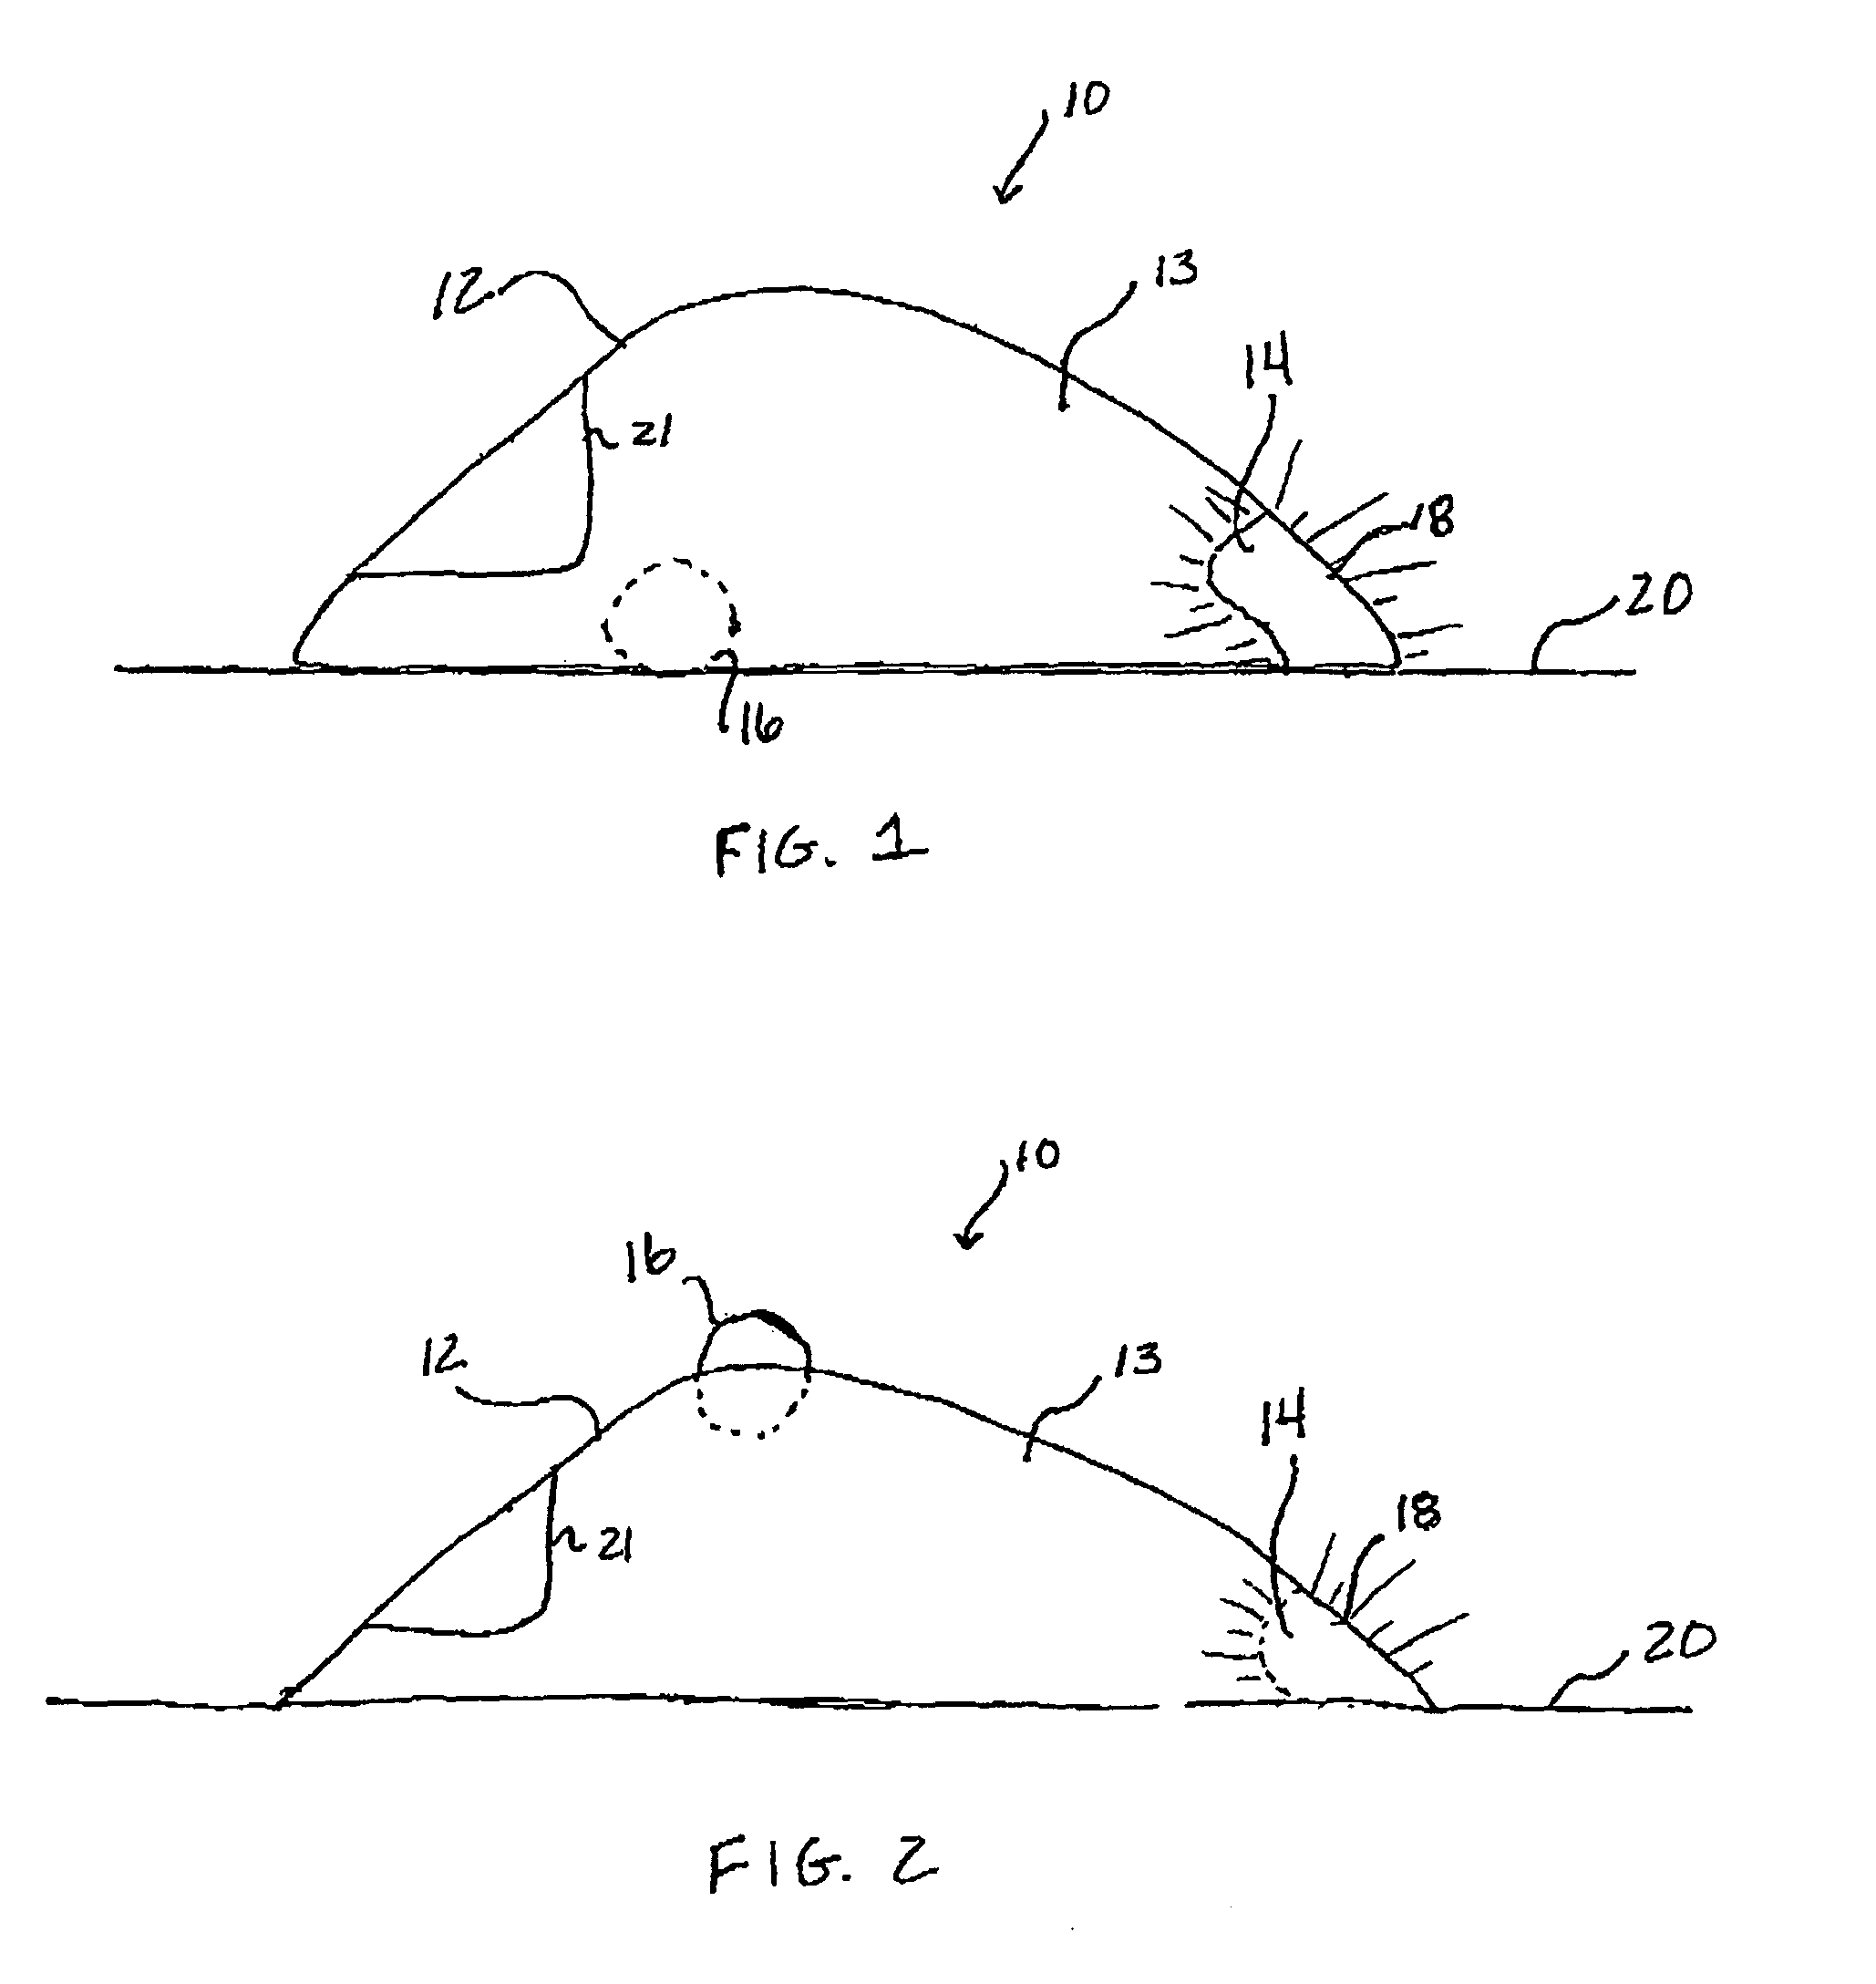 User notification system with an illuminated computer input device